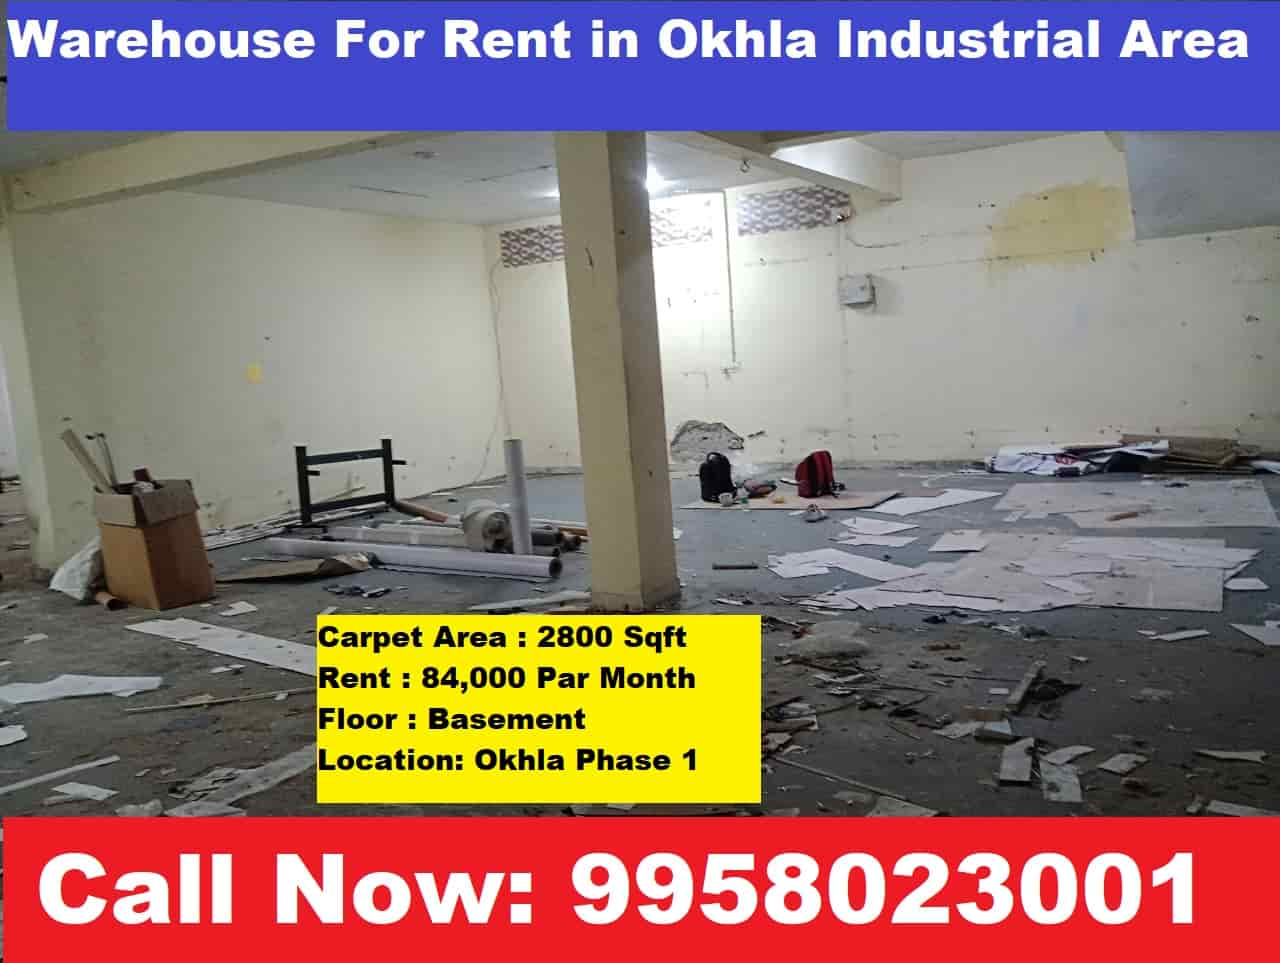 Warehouse For Rent in Okhla Industrial Area Delhi